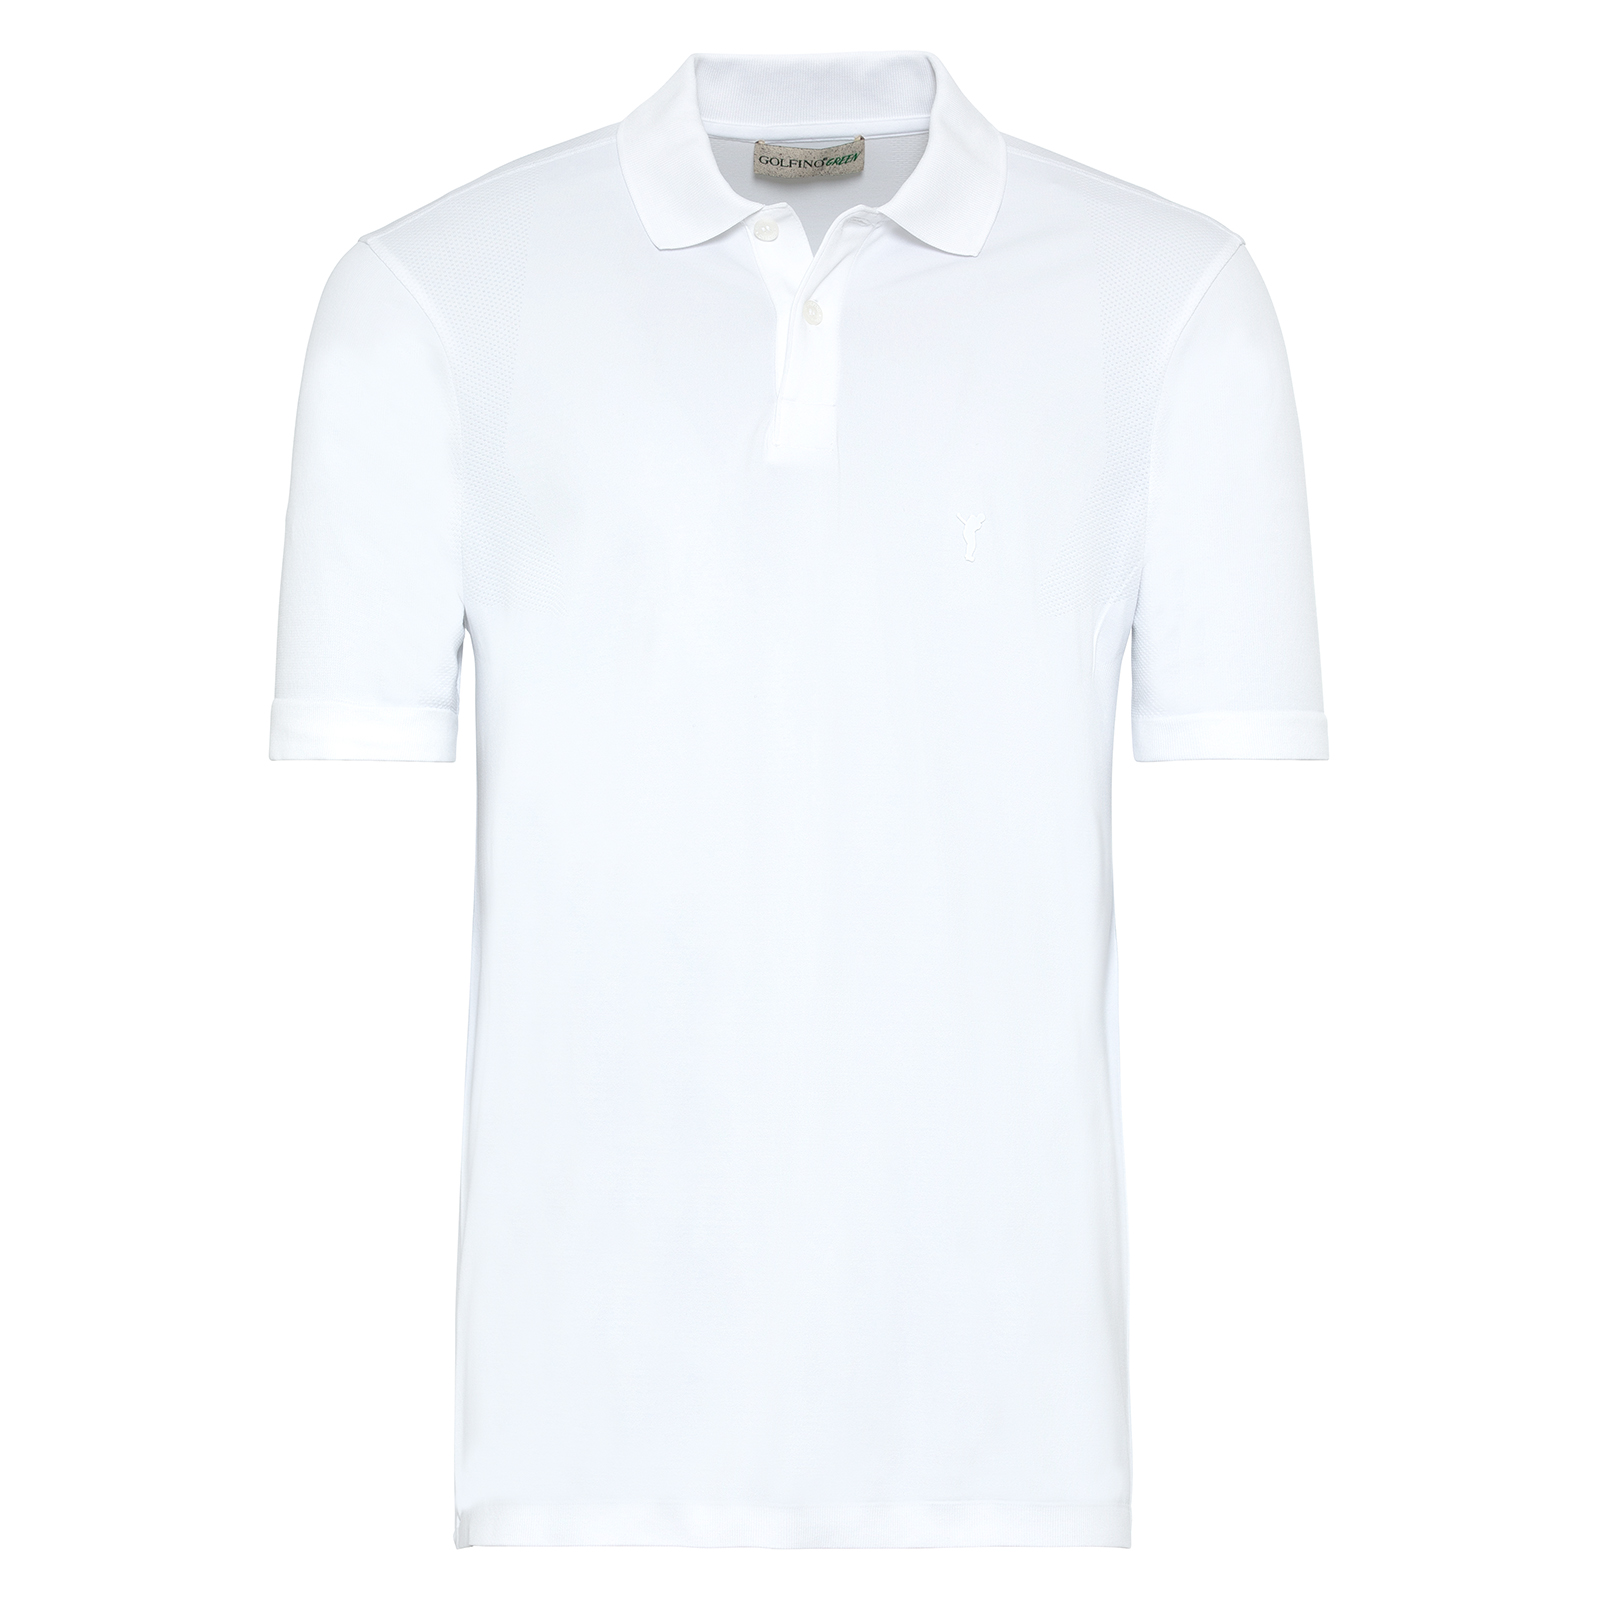 Men's seamless golf polo shirt made from sustainable jacquard 